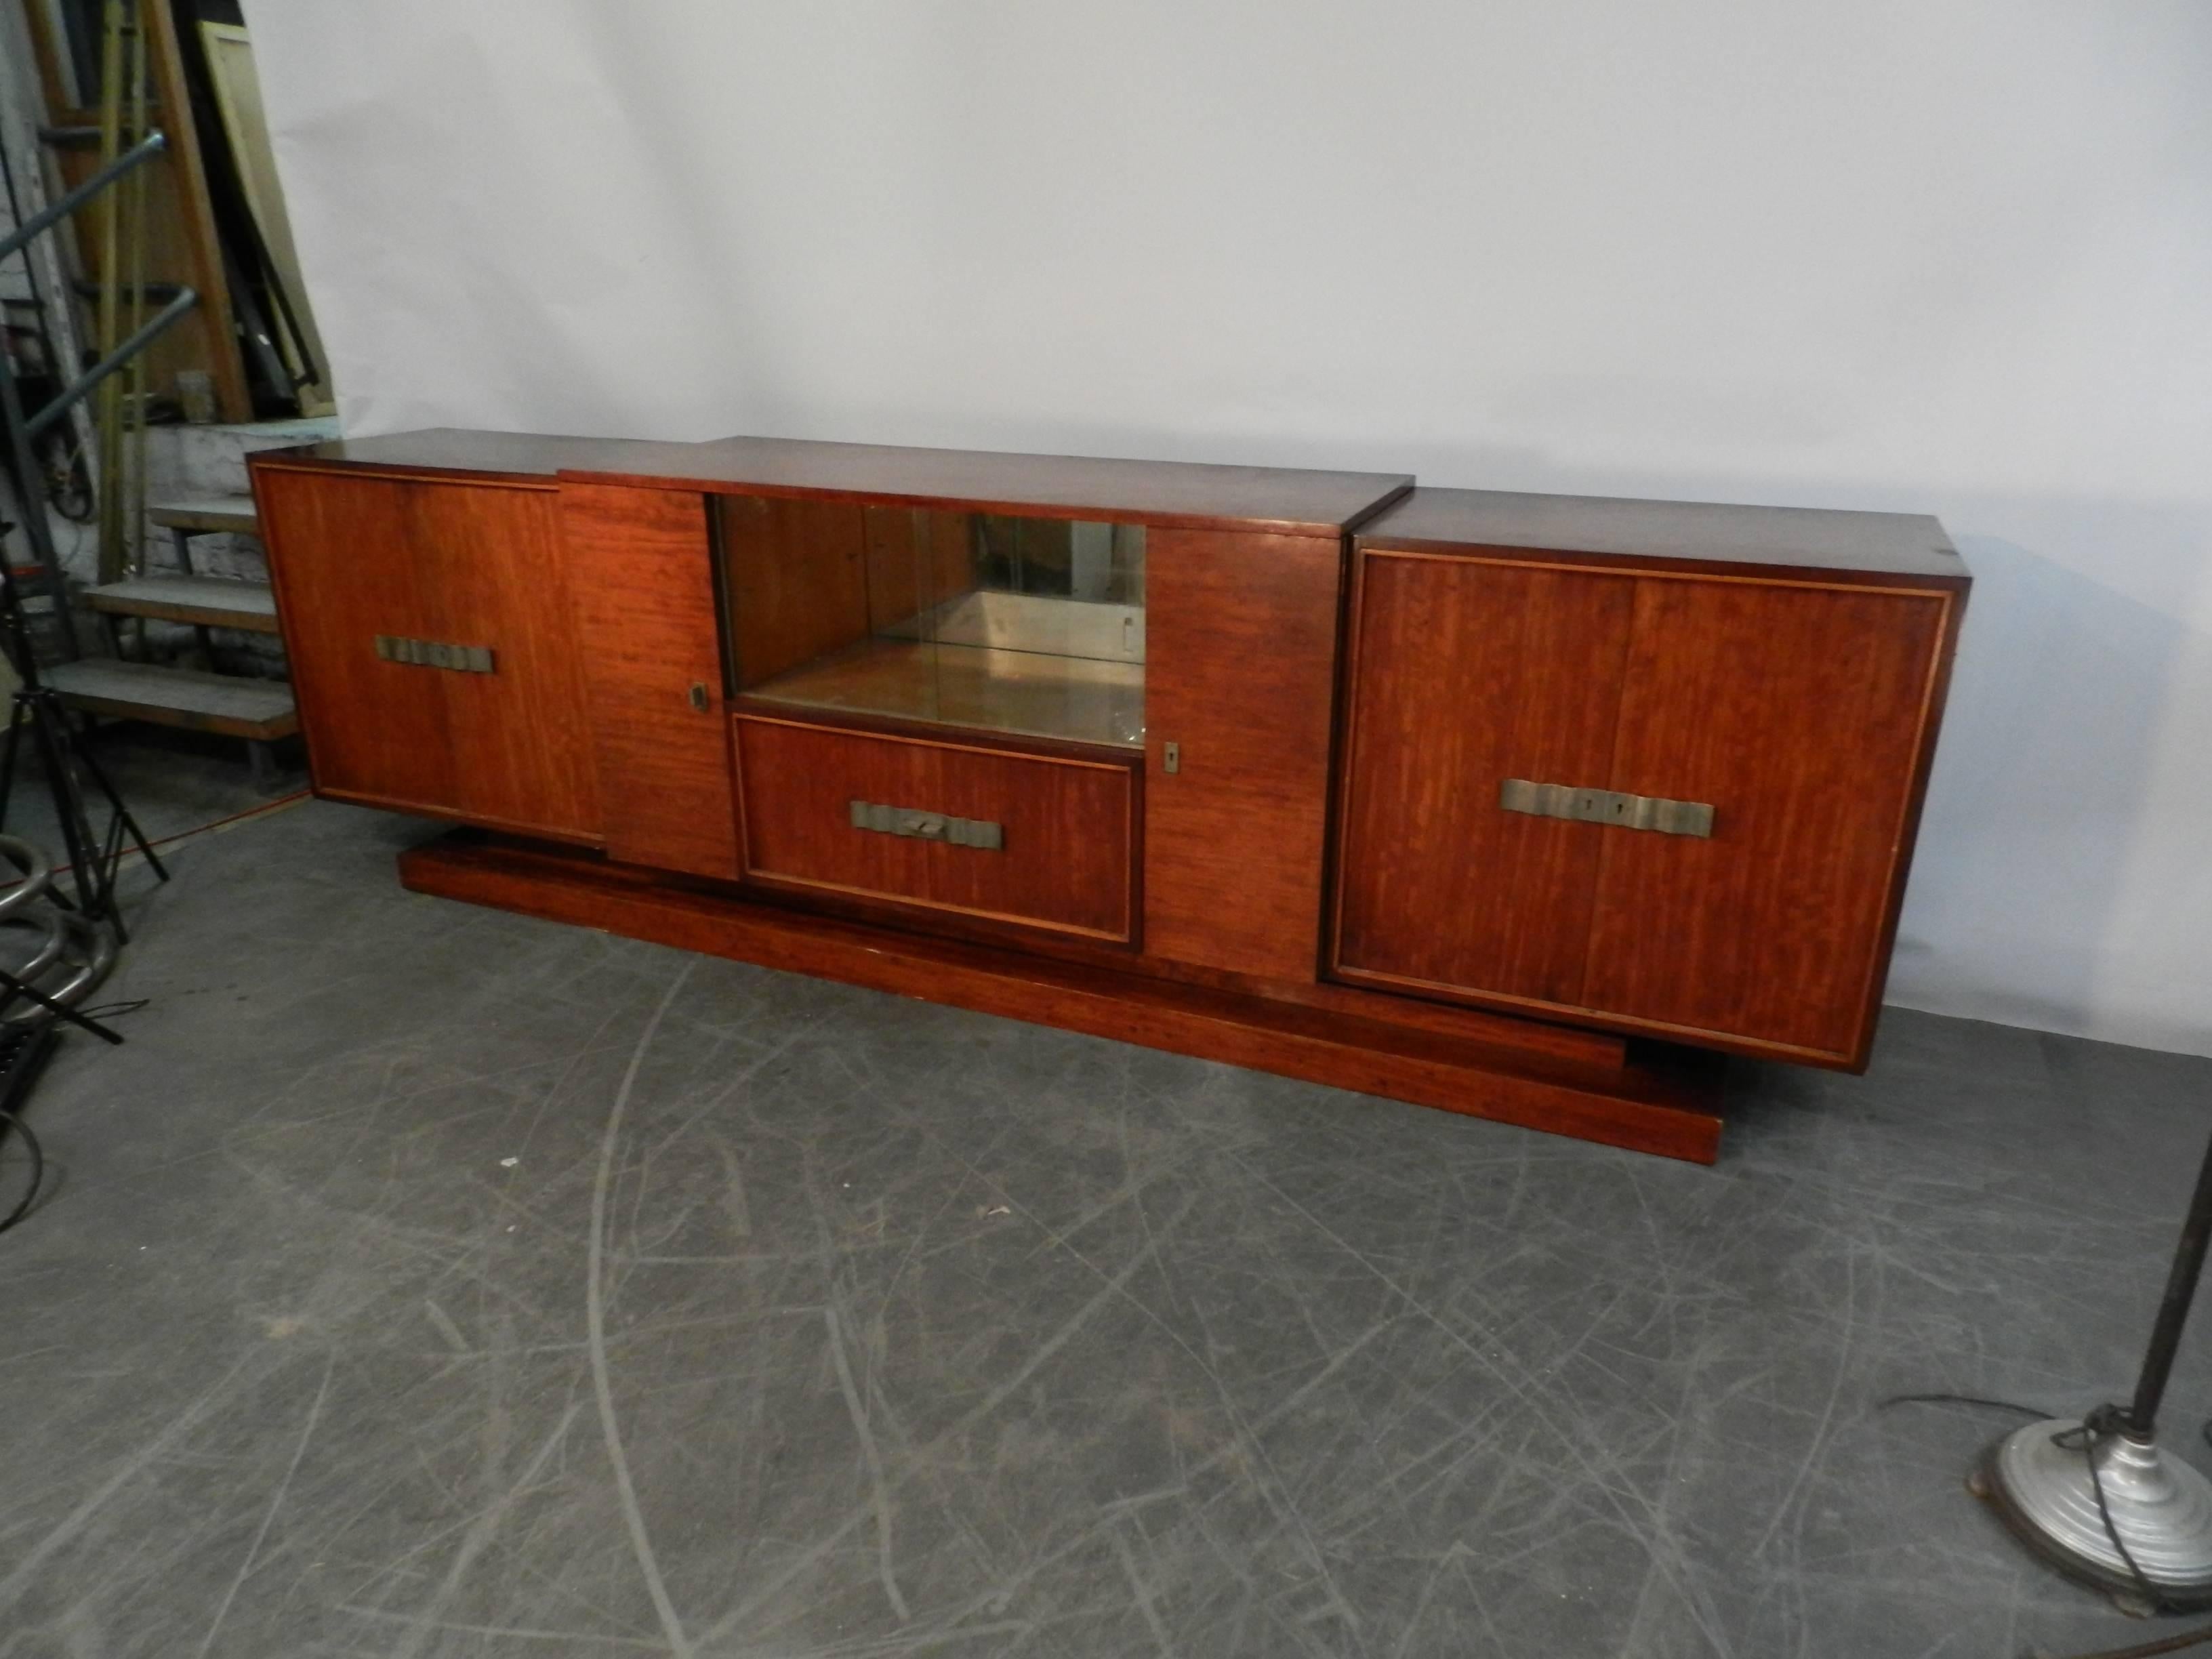 Decoene Freres, large Art Deco sideboard in MOVINGUI MOIRE ,
circa 1930.